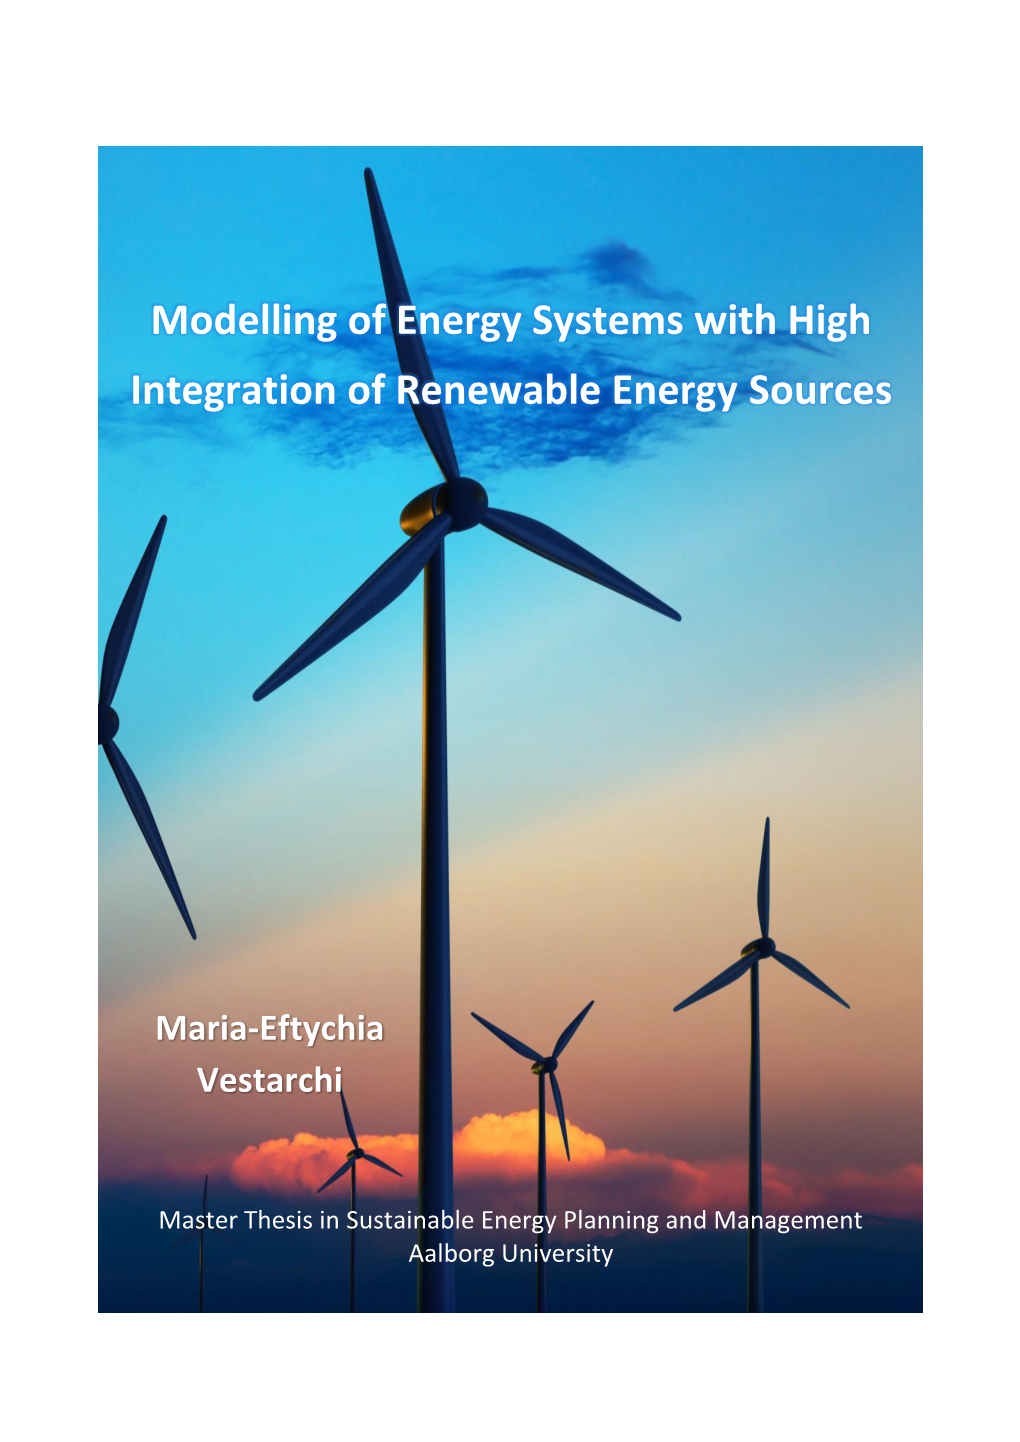 Thesis in Sustainable Energy Planning and Management Aalborg University